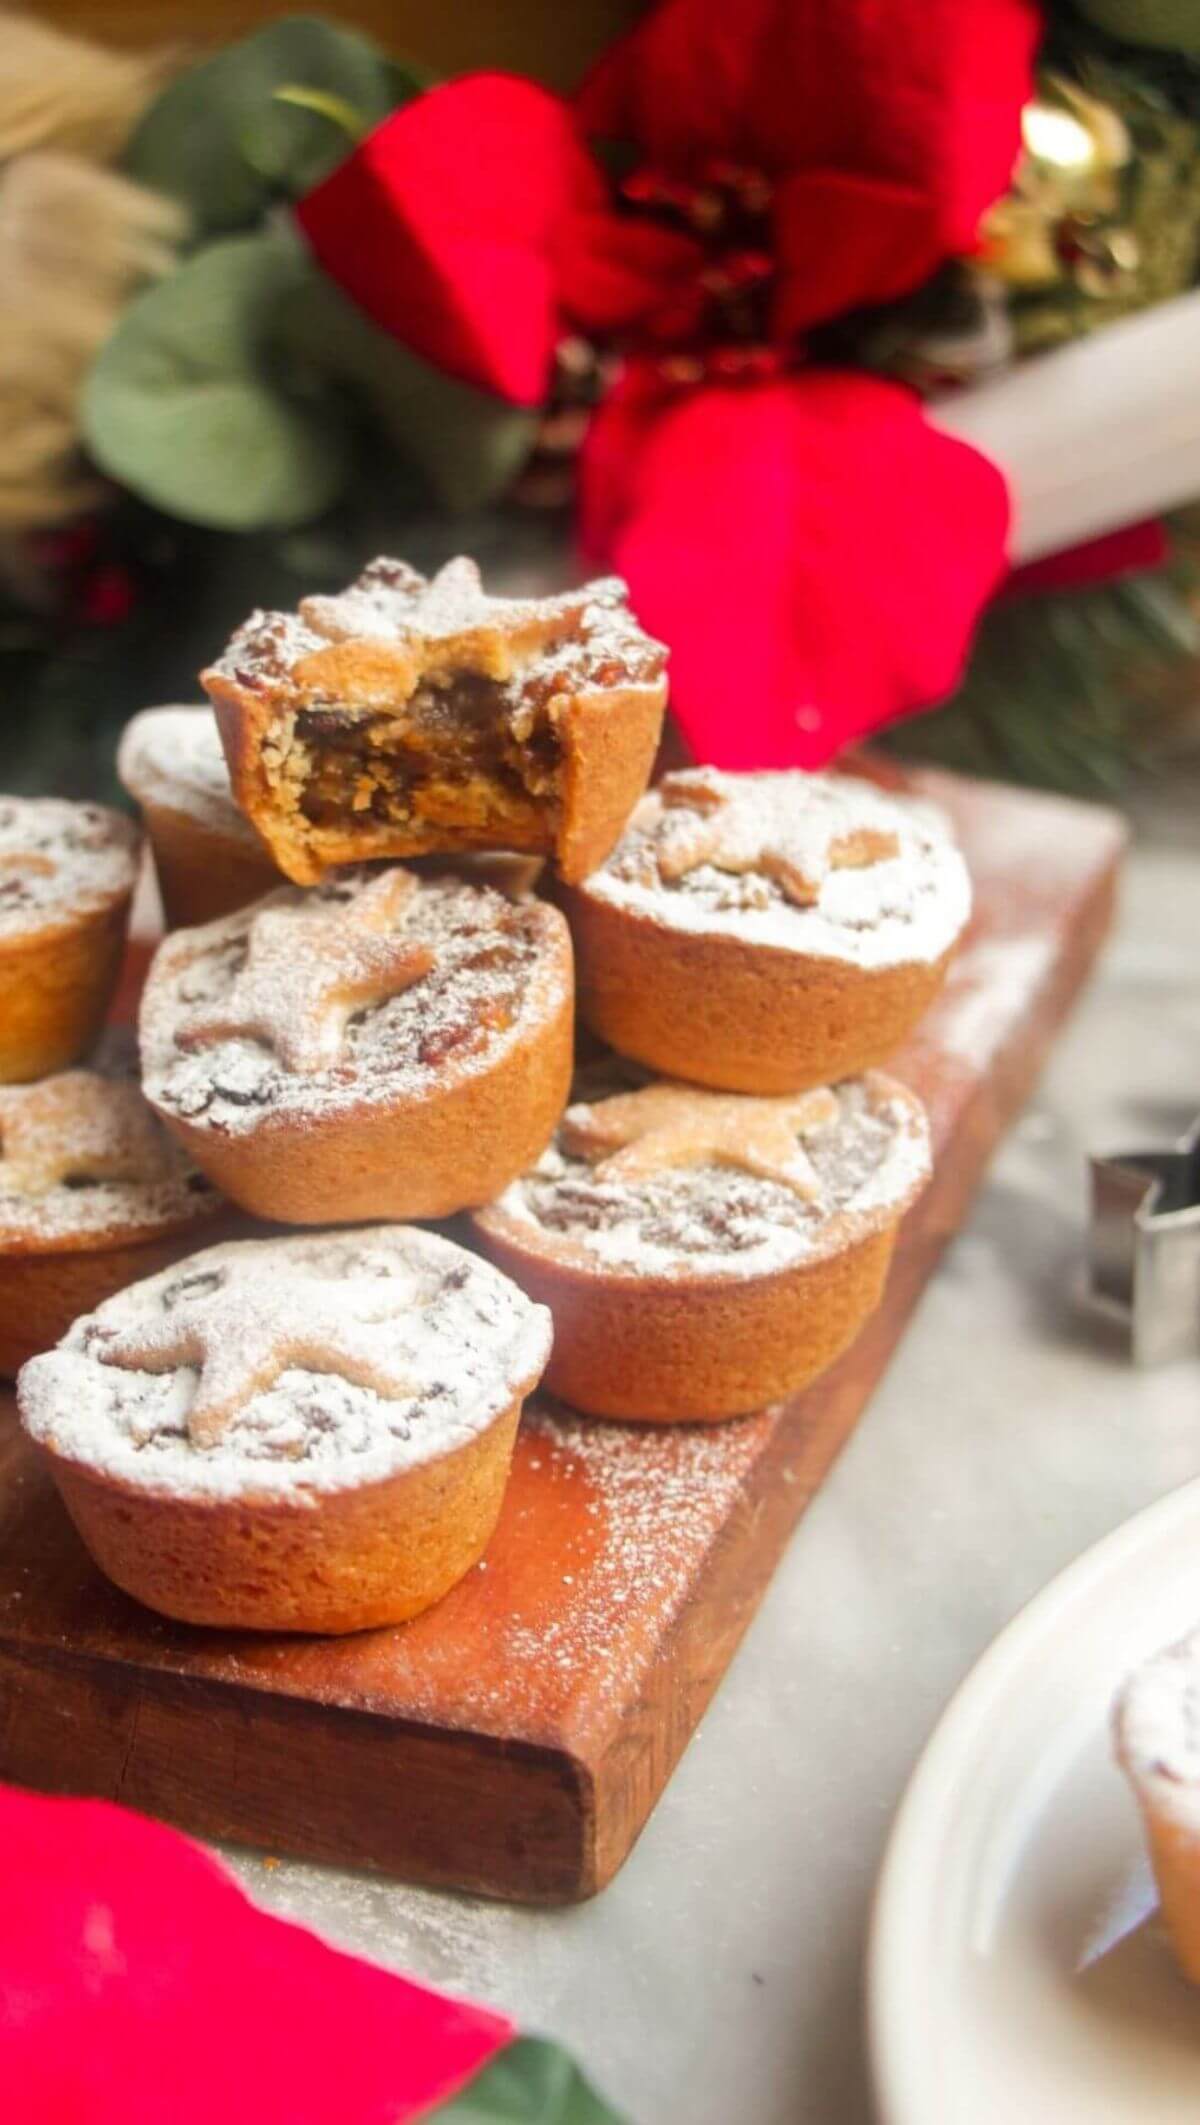 A pile of icing sugar dusted Christmas mince pies on a small wooden board with Christmas deocrations in the background.